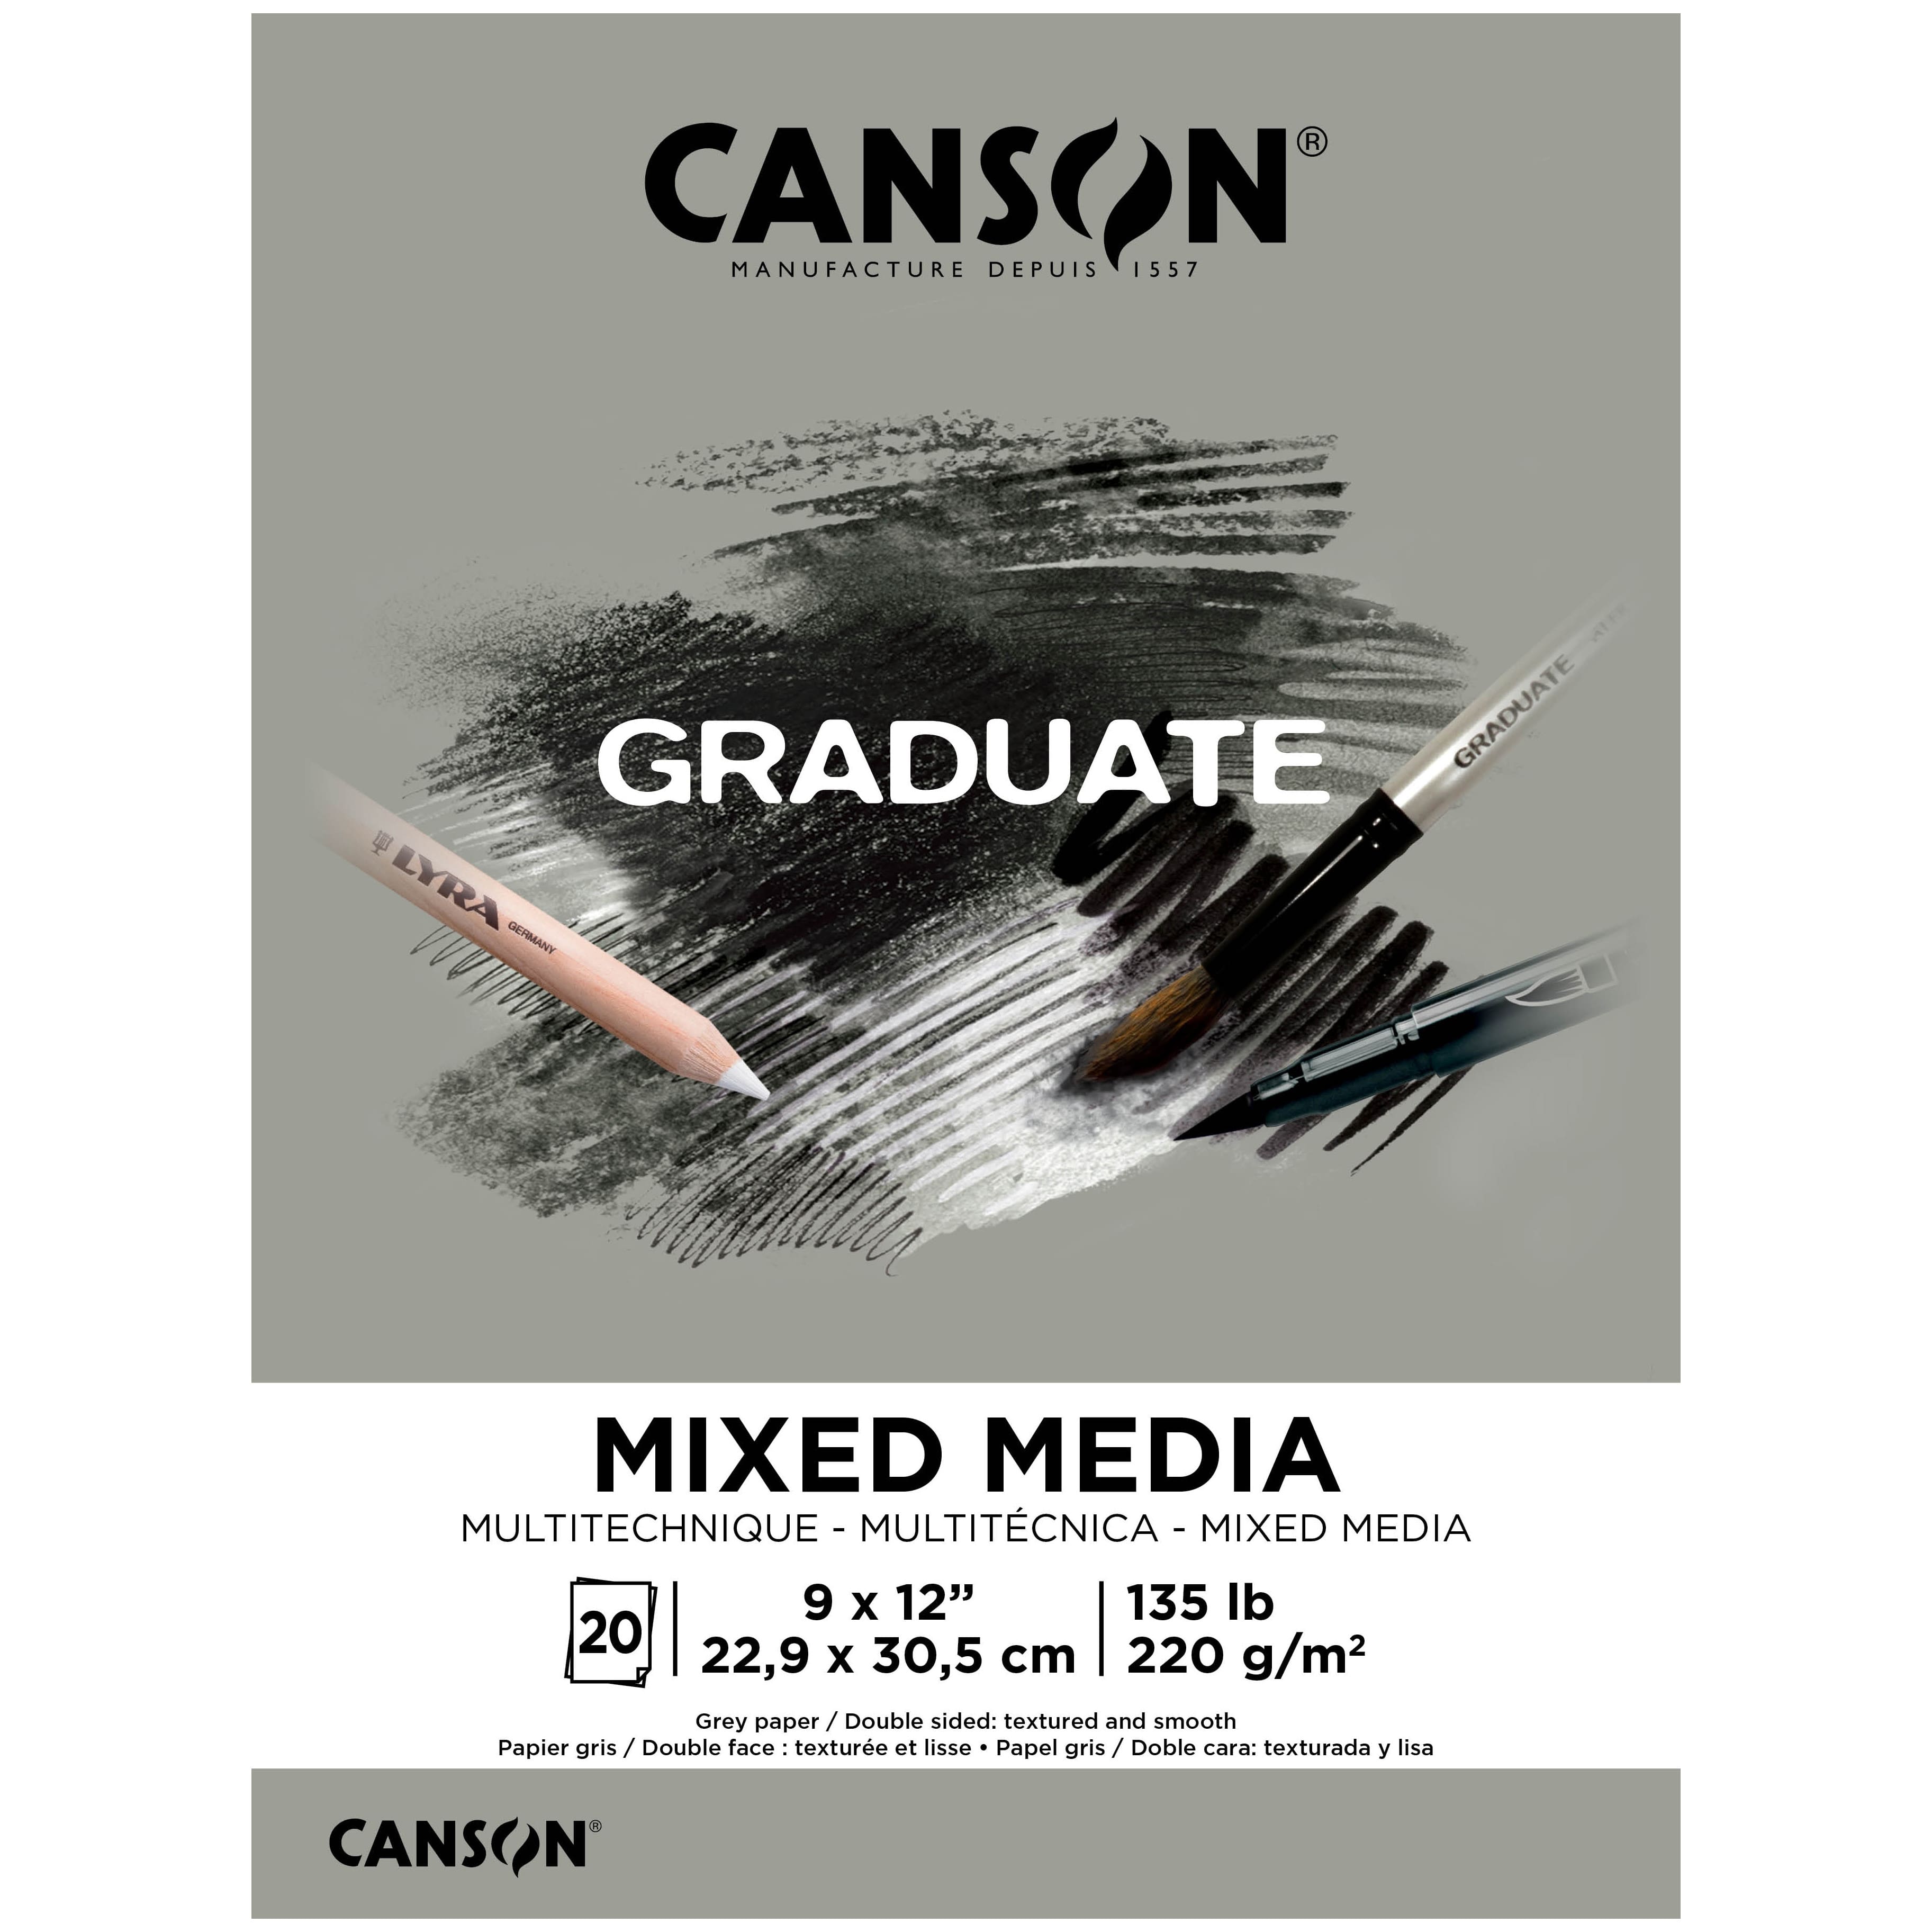 Canson Graduate 9x12 Drawing Paper Pad (30 Sheets) 